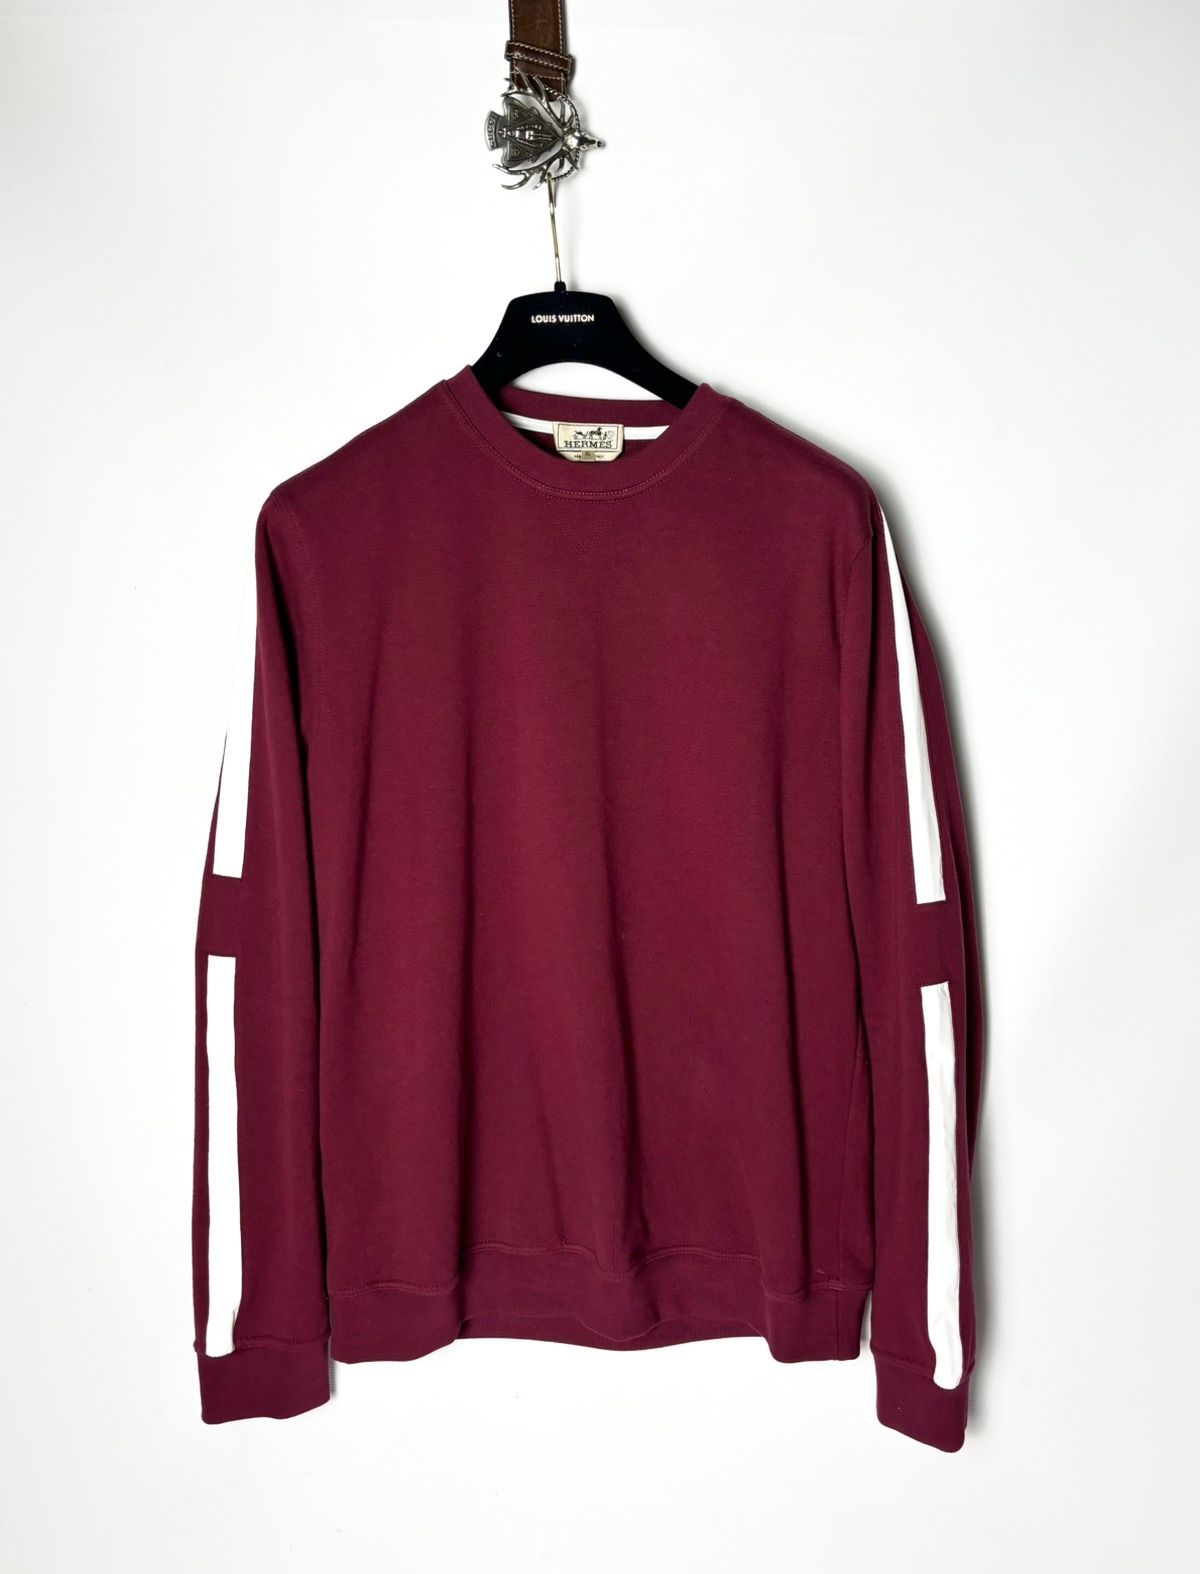 image of Hermes Sweatshirt Leather Details in Red, Men's (Size XL)